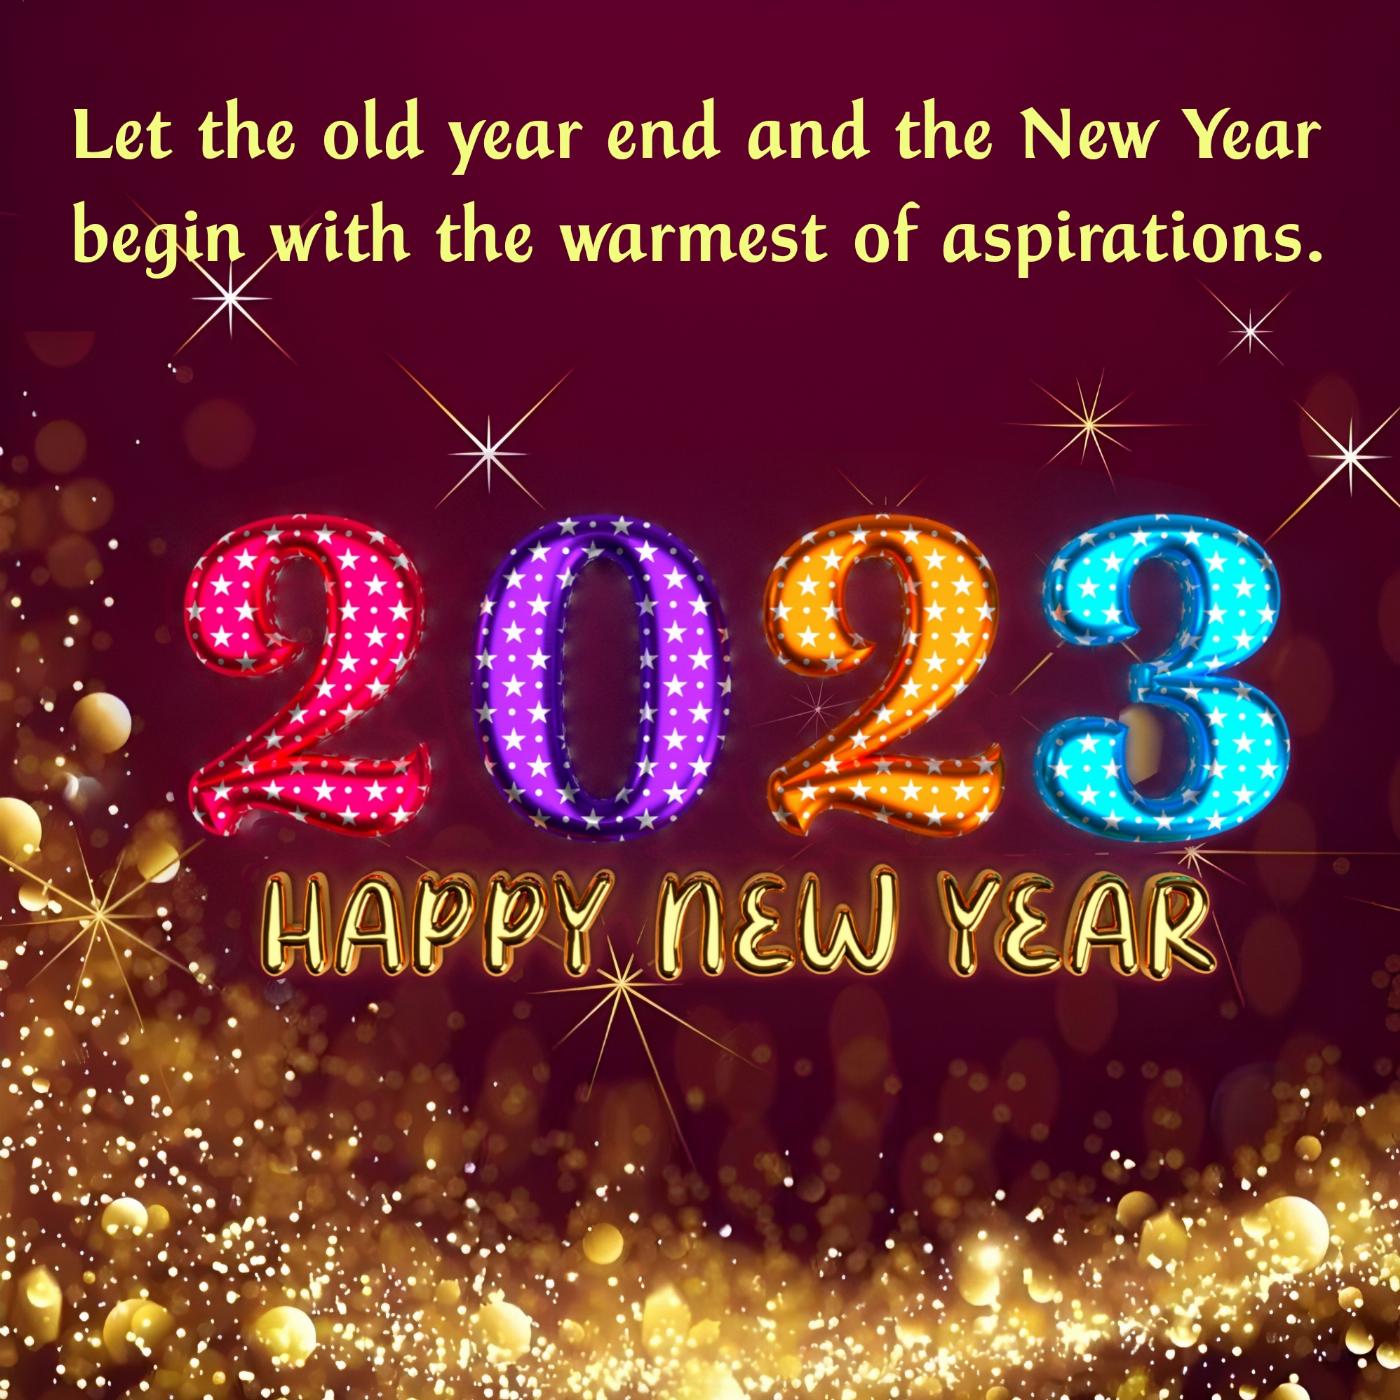 Let the old year end and the New Year begin with the warmest of aspirations